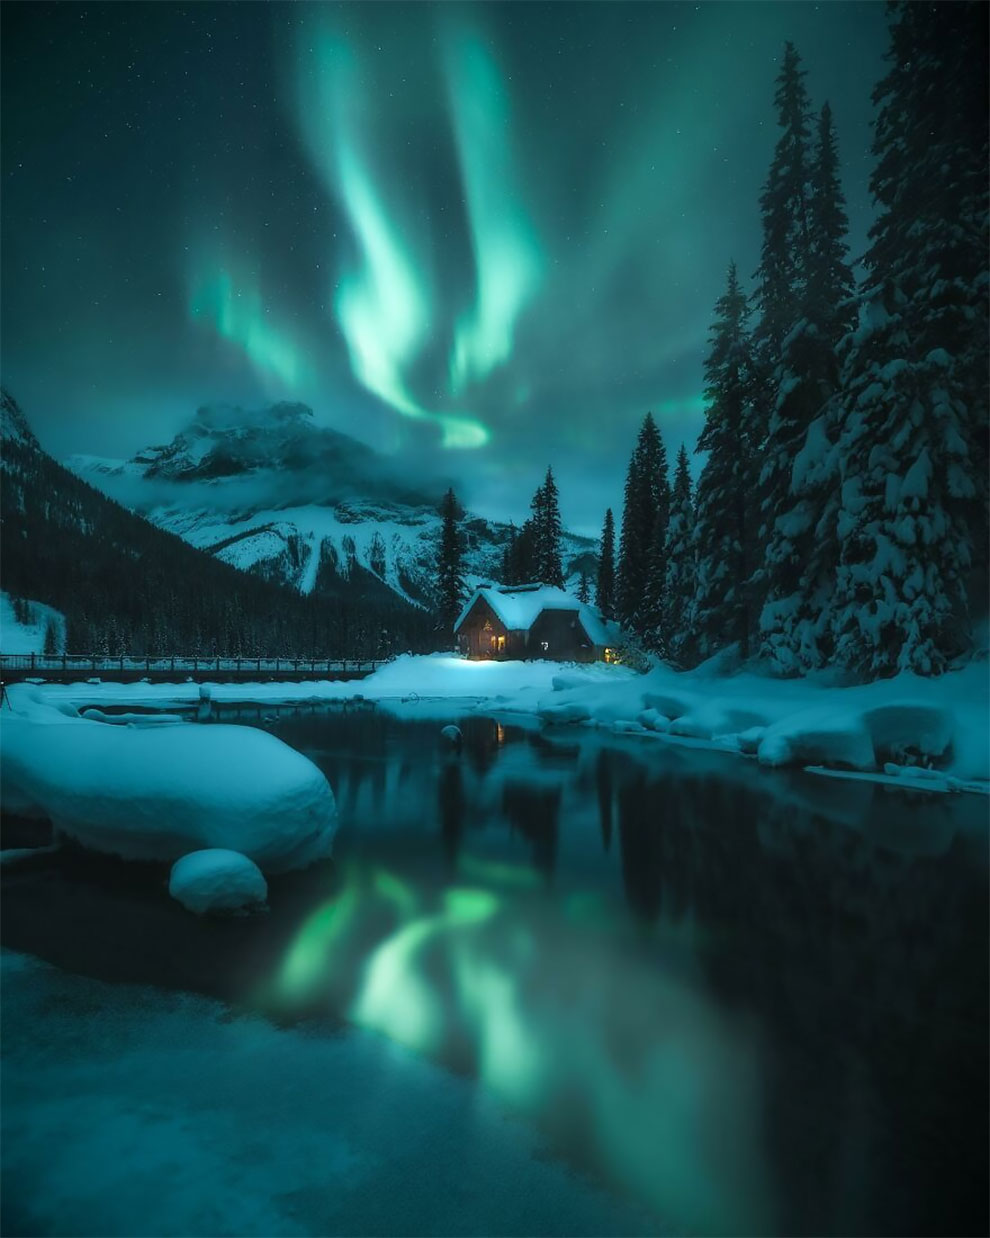 “Under A Canadian Sky” By Parker Burkett British Columbia, Canada